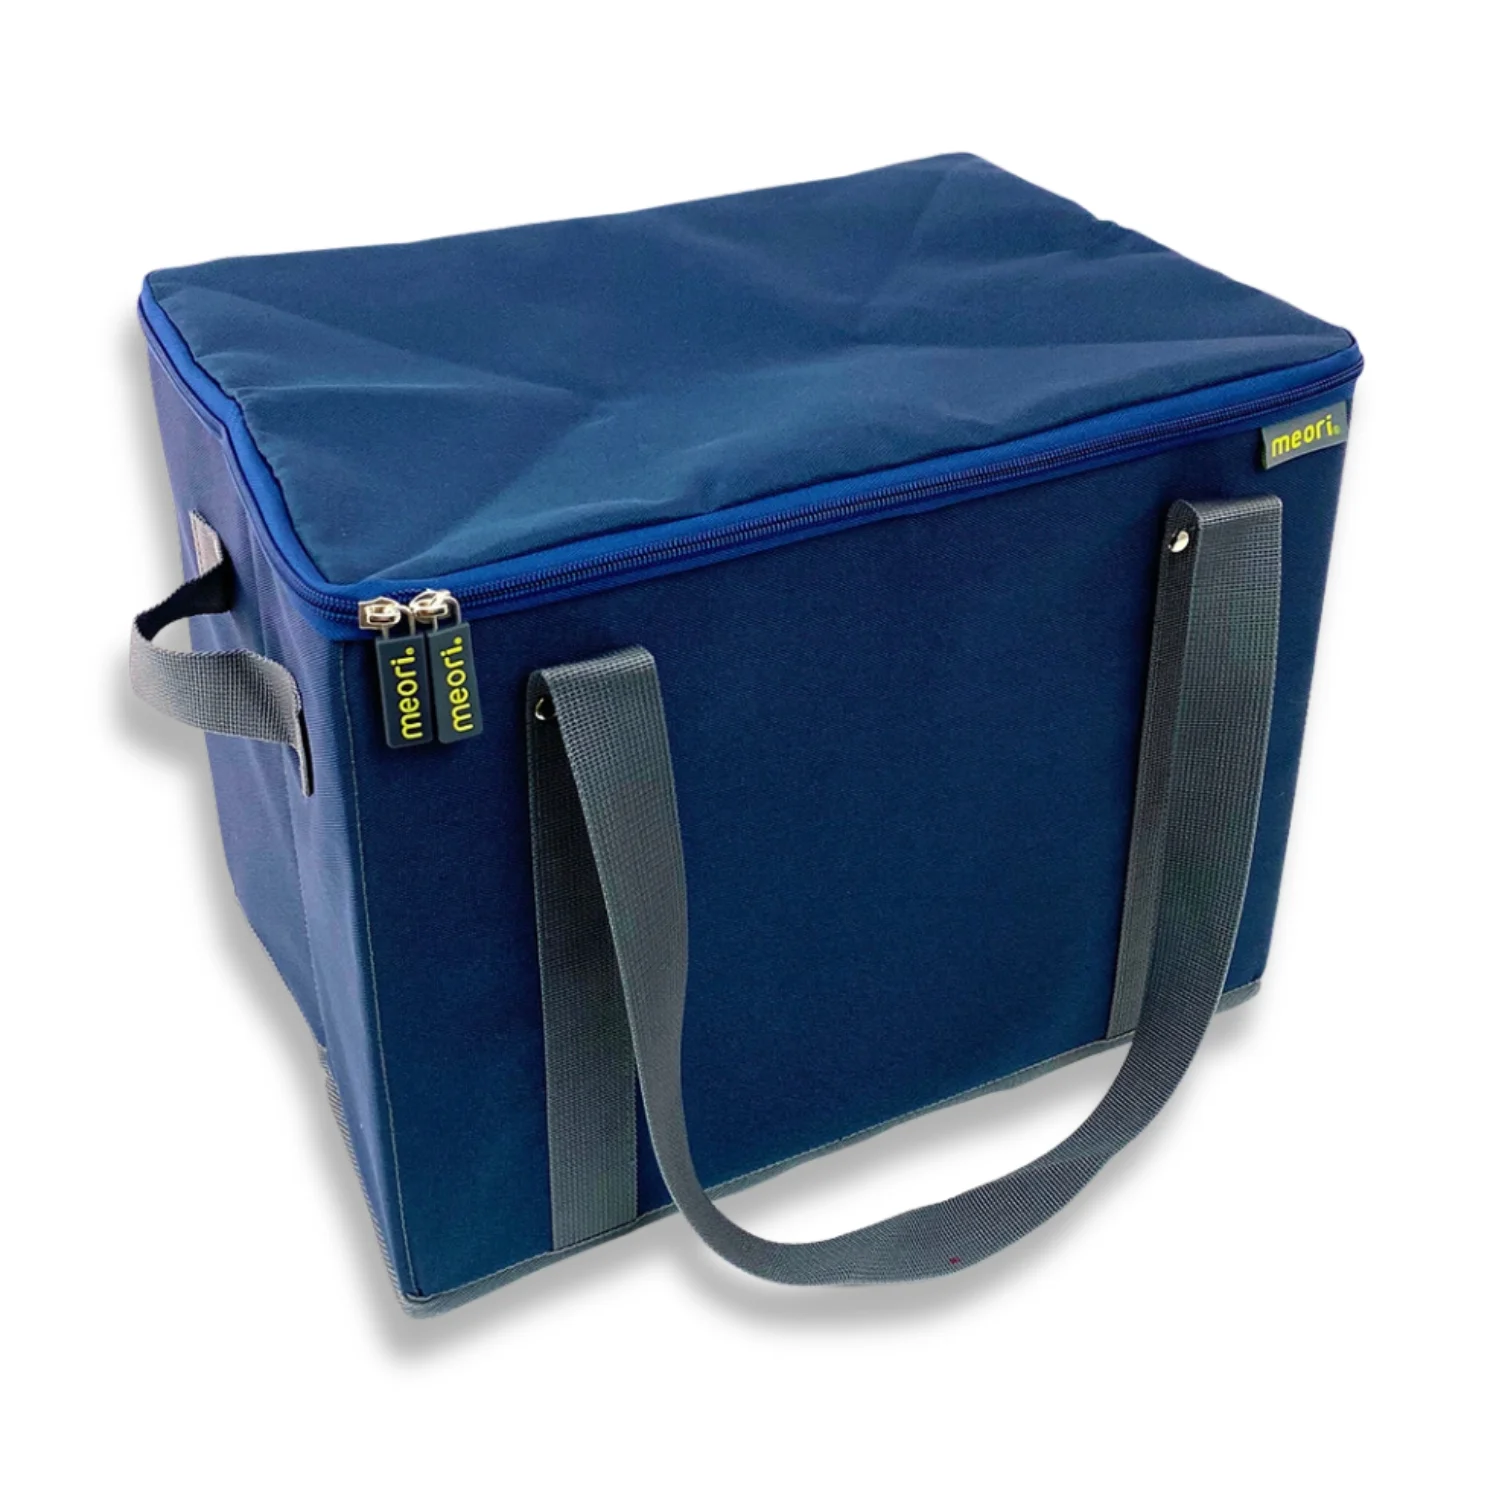 Marine Blue Insulated Grocery Bag With Zipper